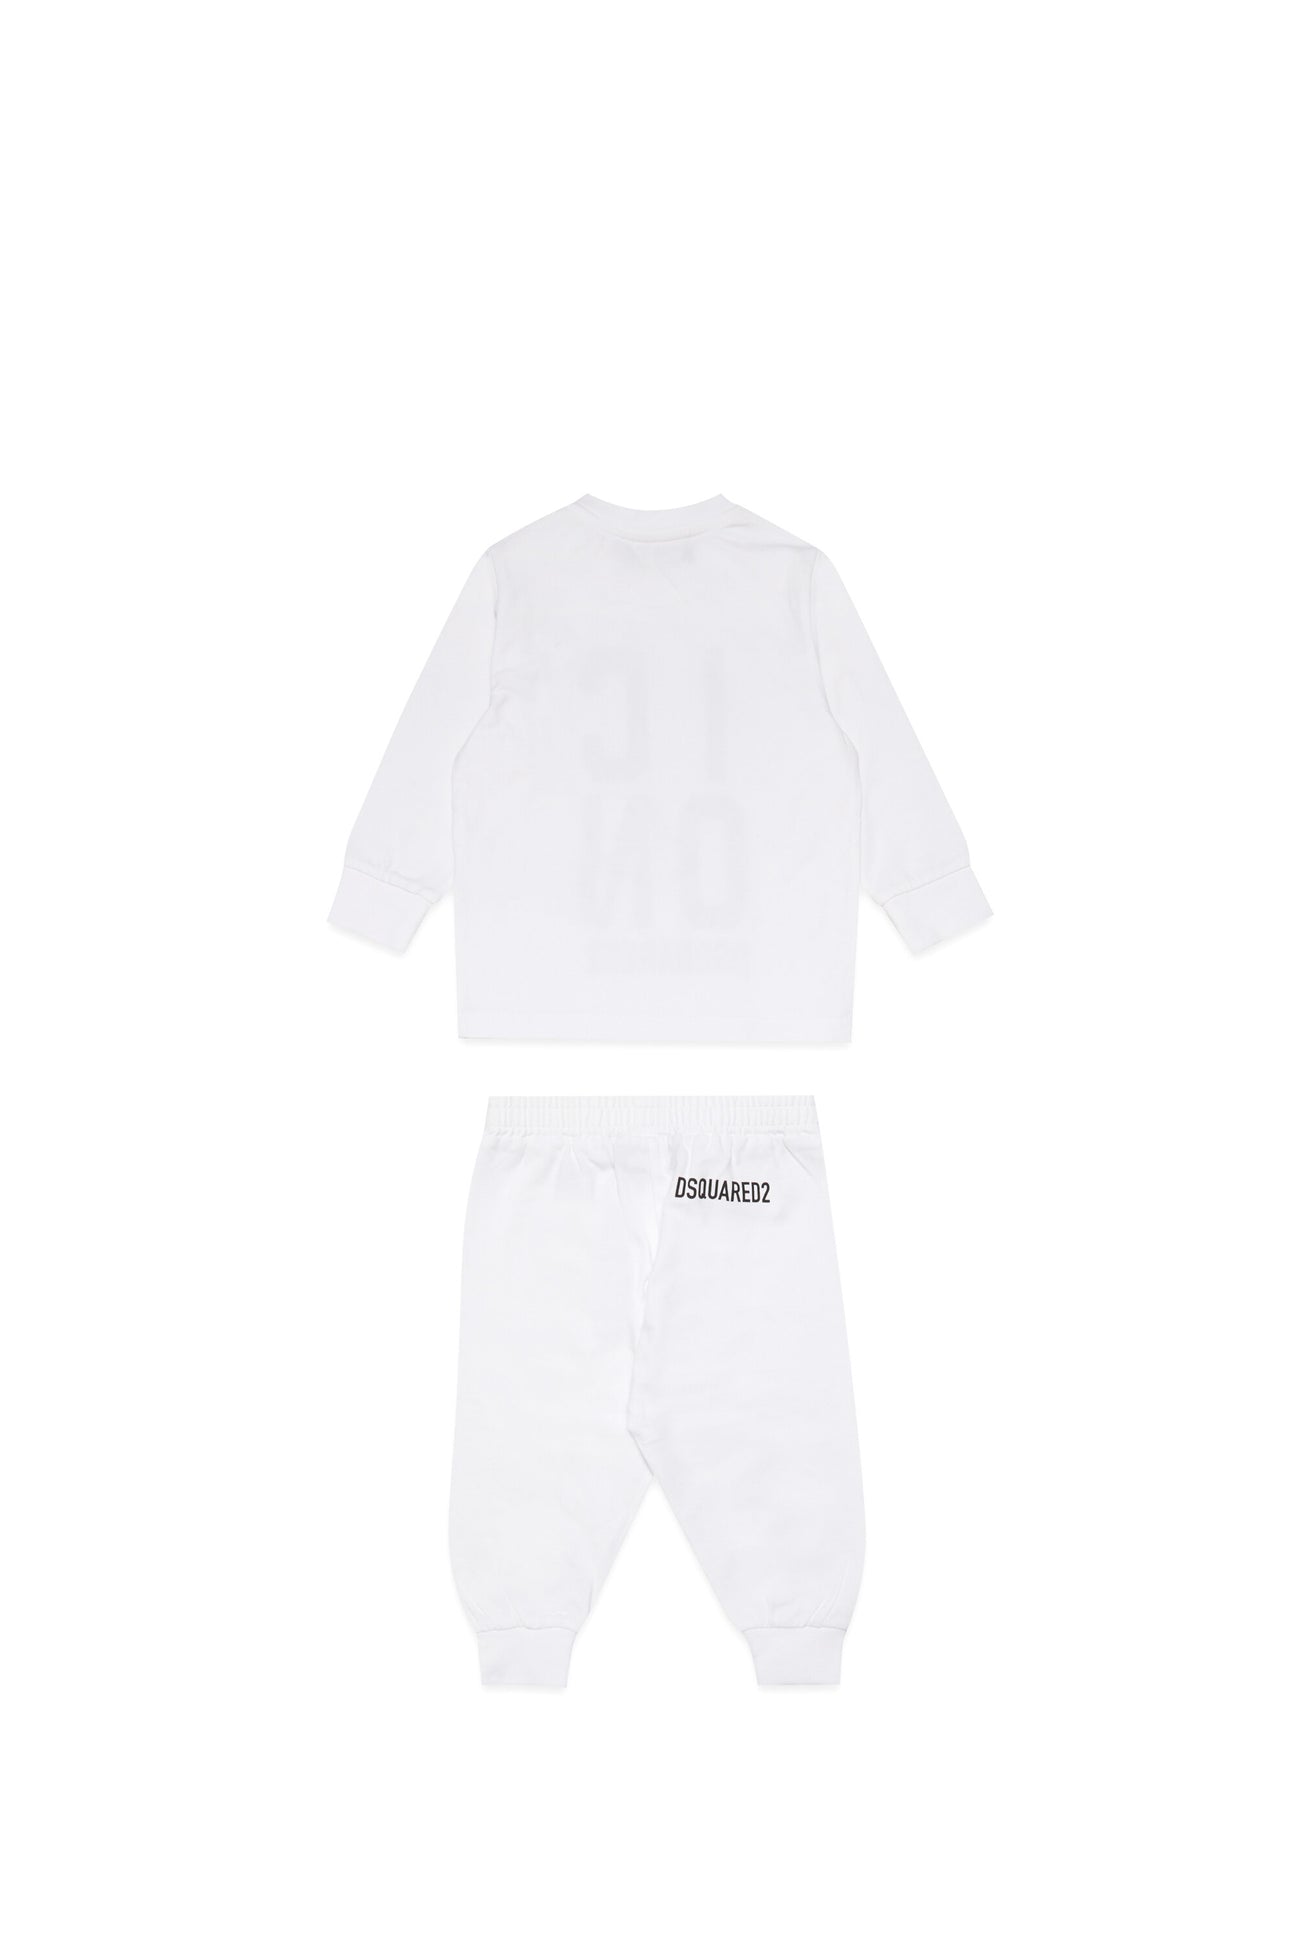 Baby Boy gabardine shorts Size 12M Color WHITE Color primary White